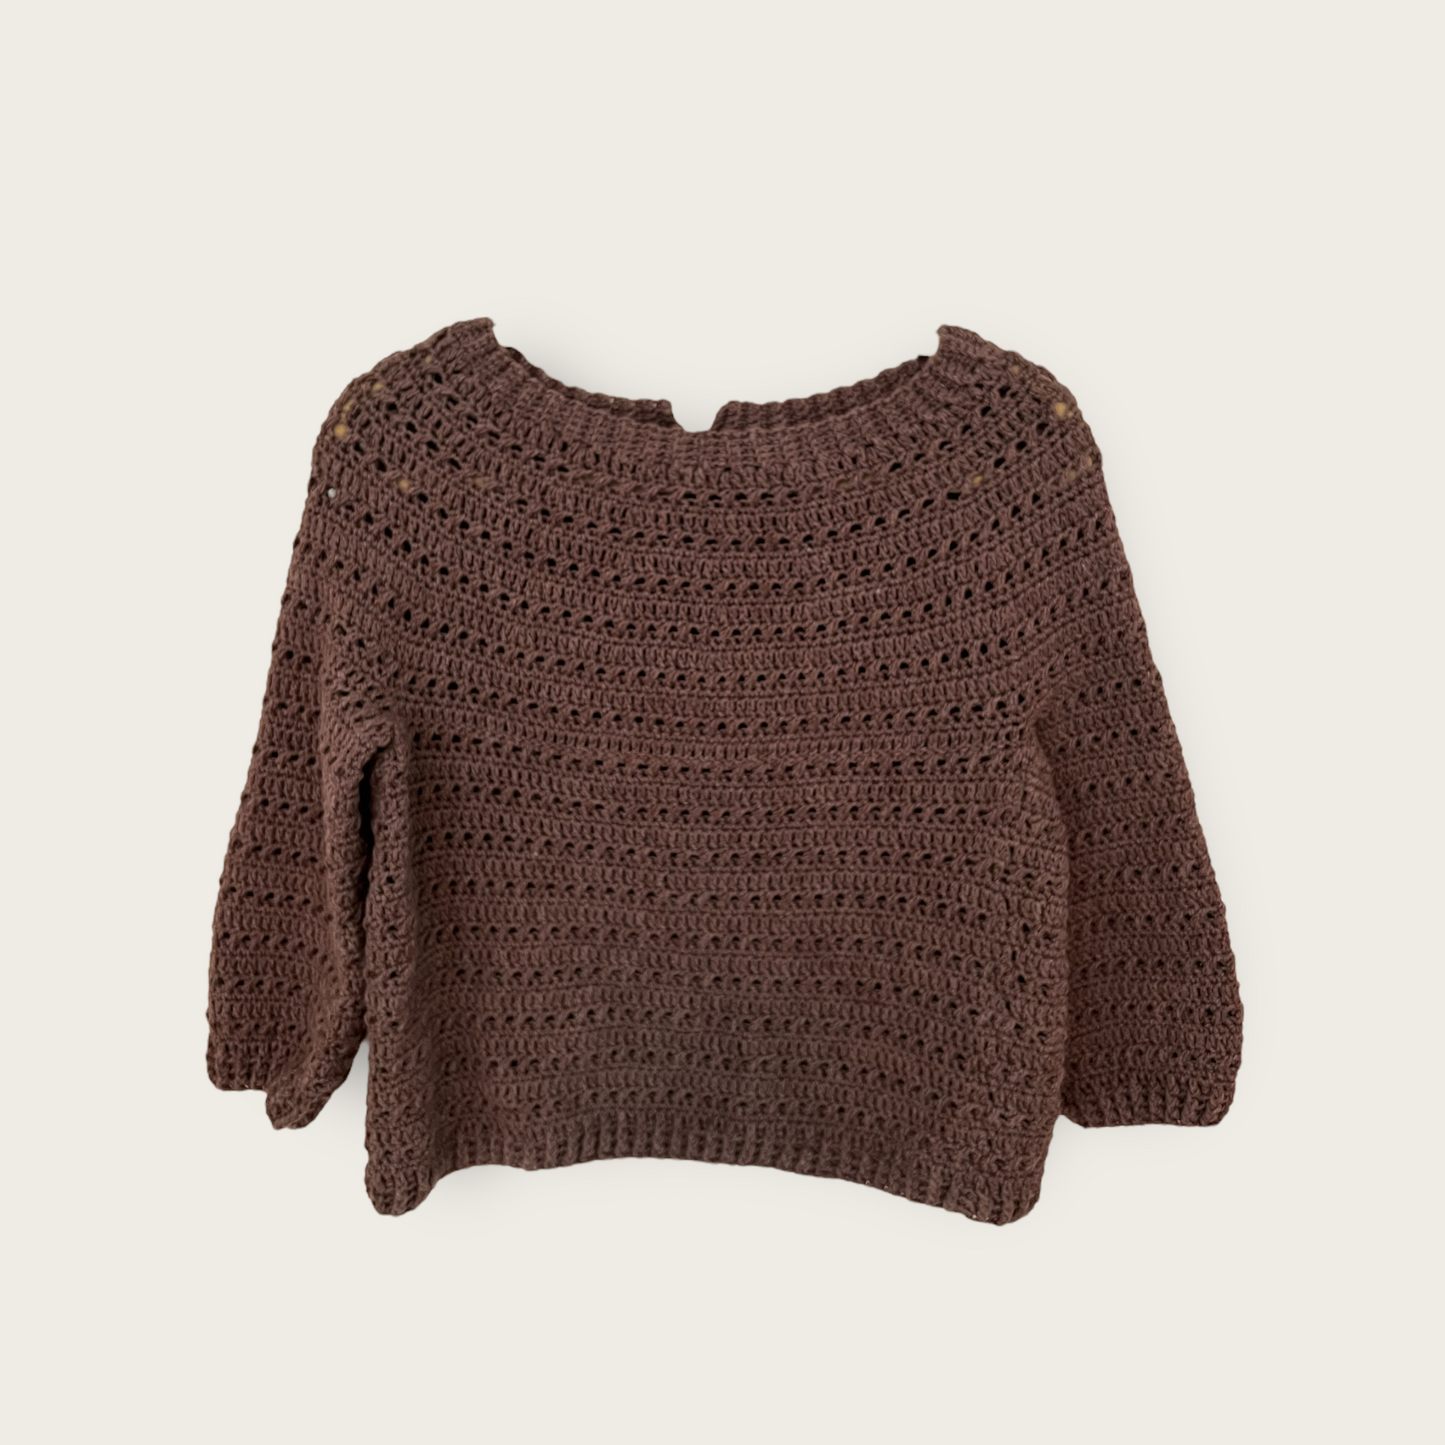 The Brown Sweater